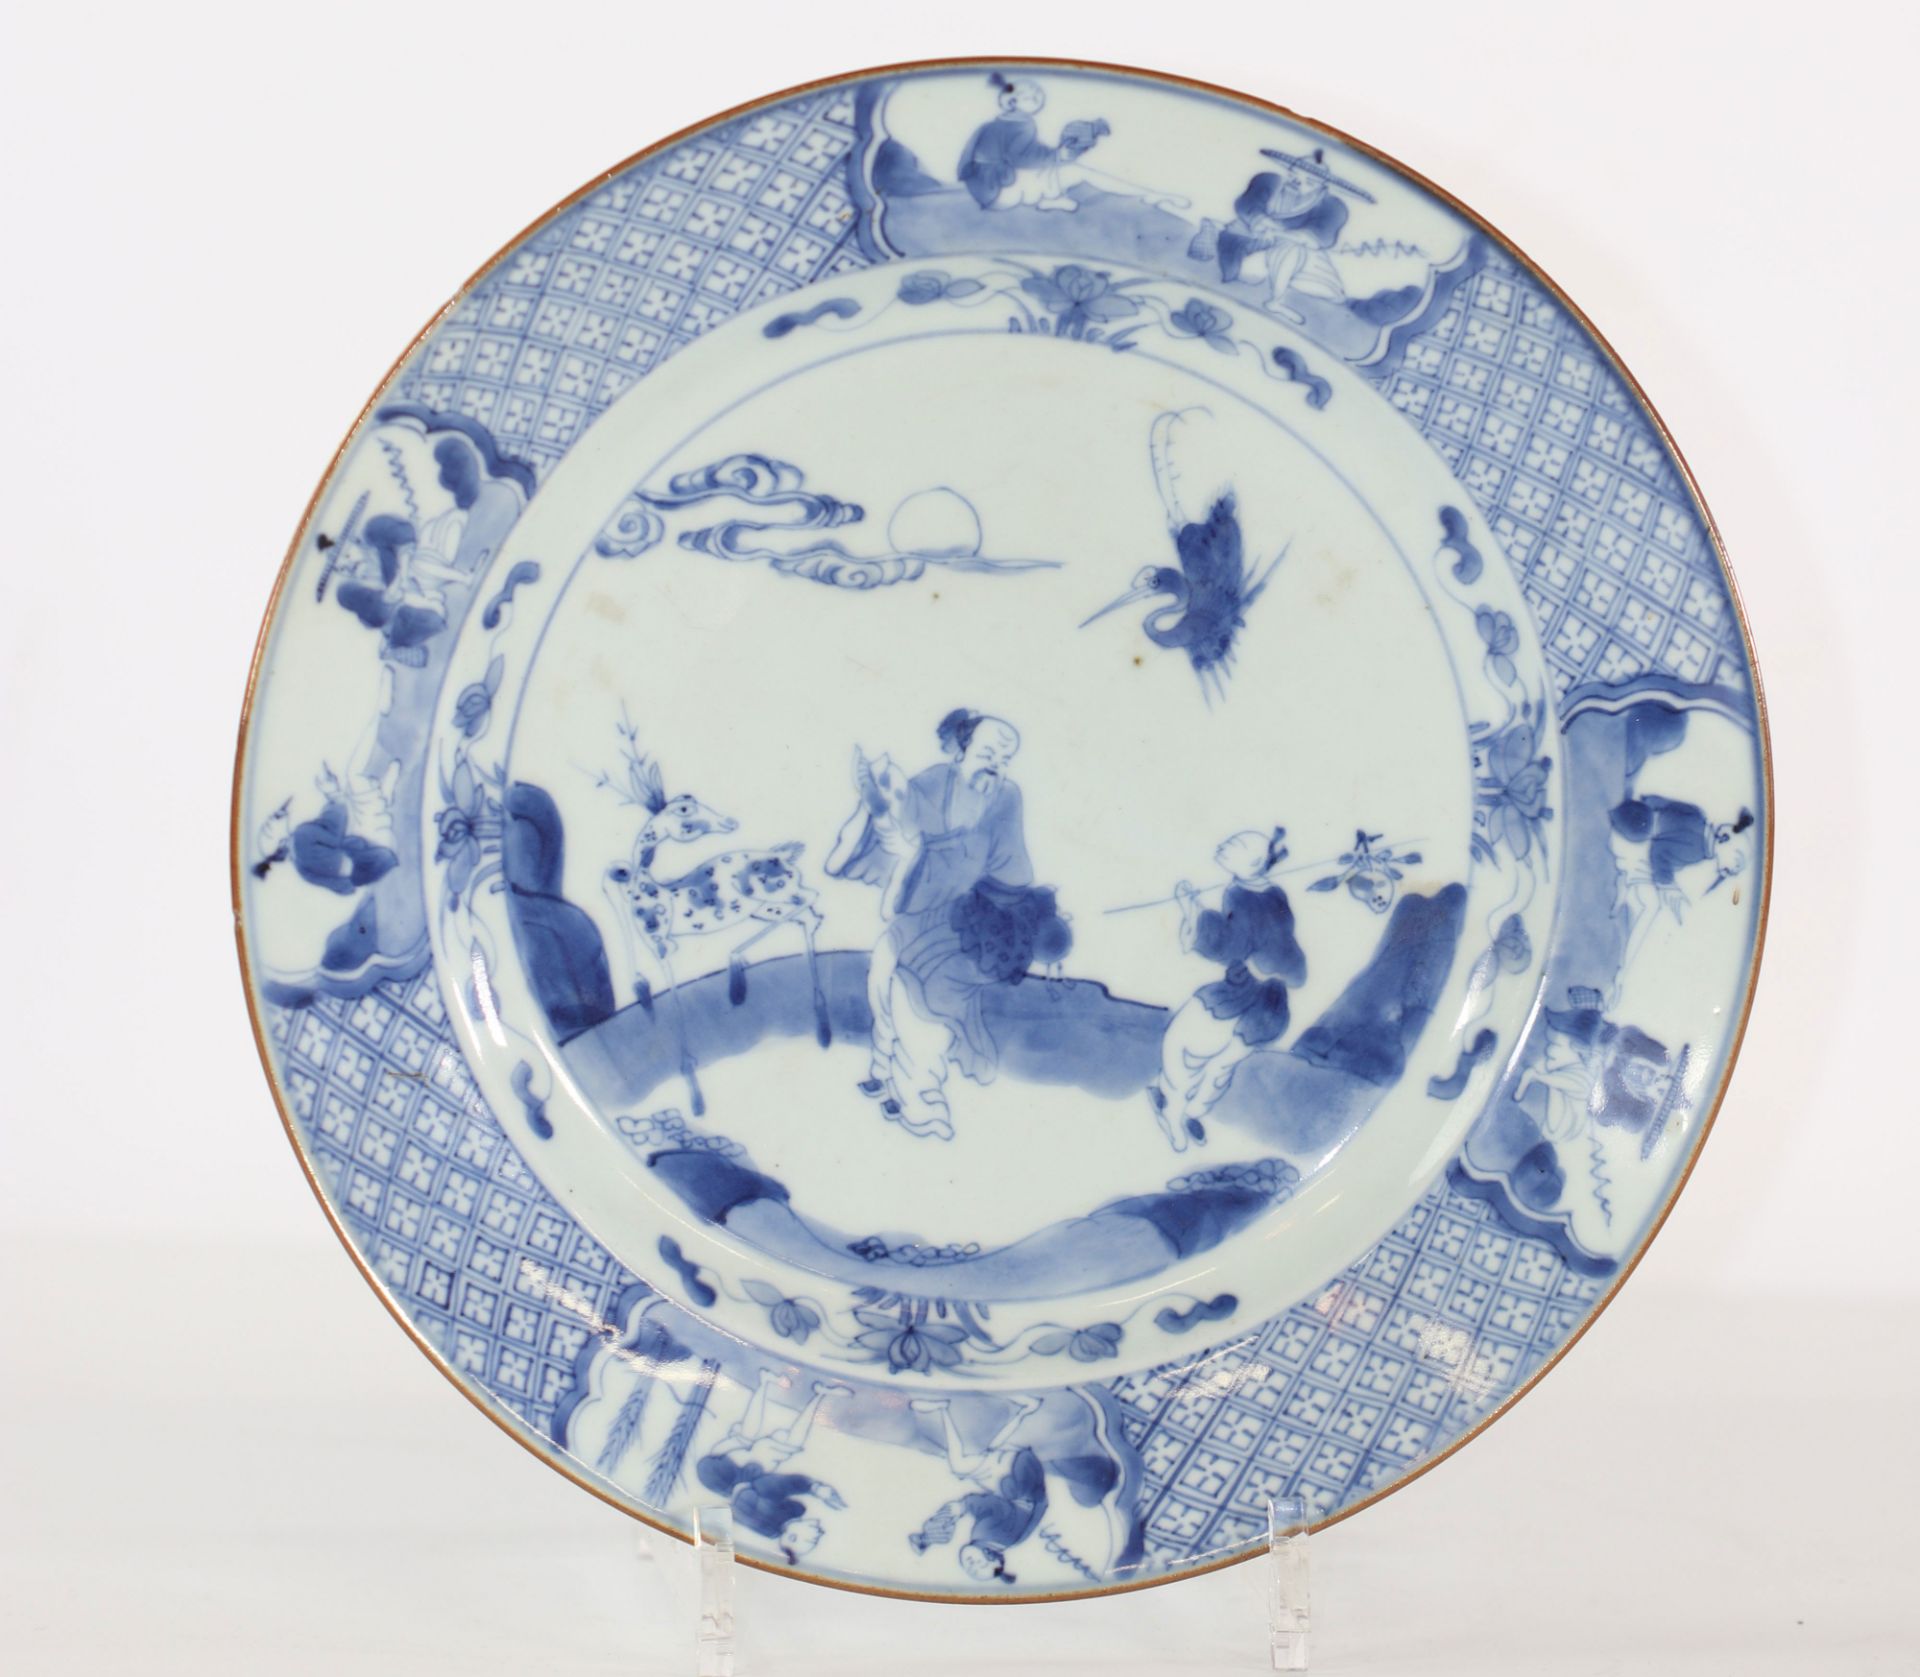 China porcelain plate blanc-bleu 18th decor of characters and deer